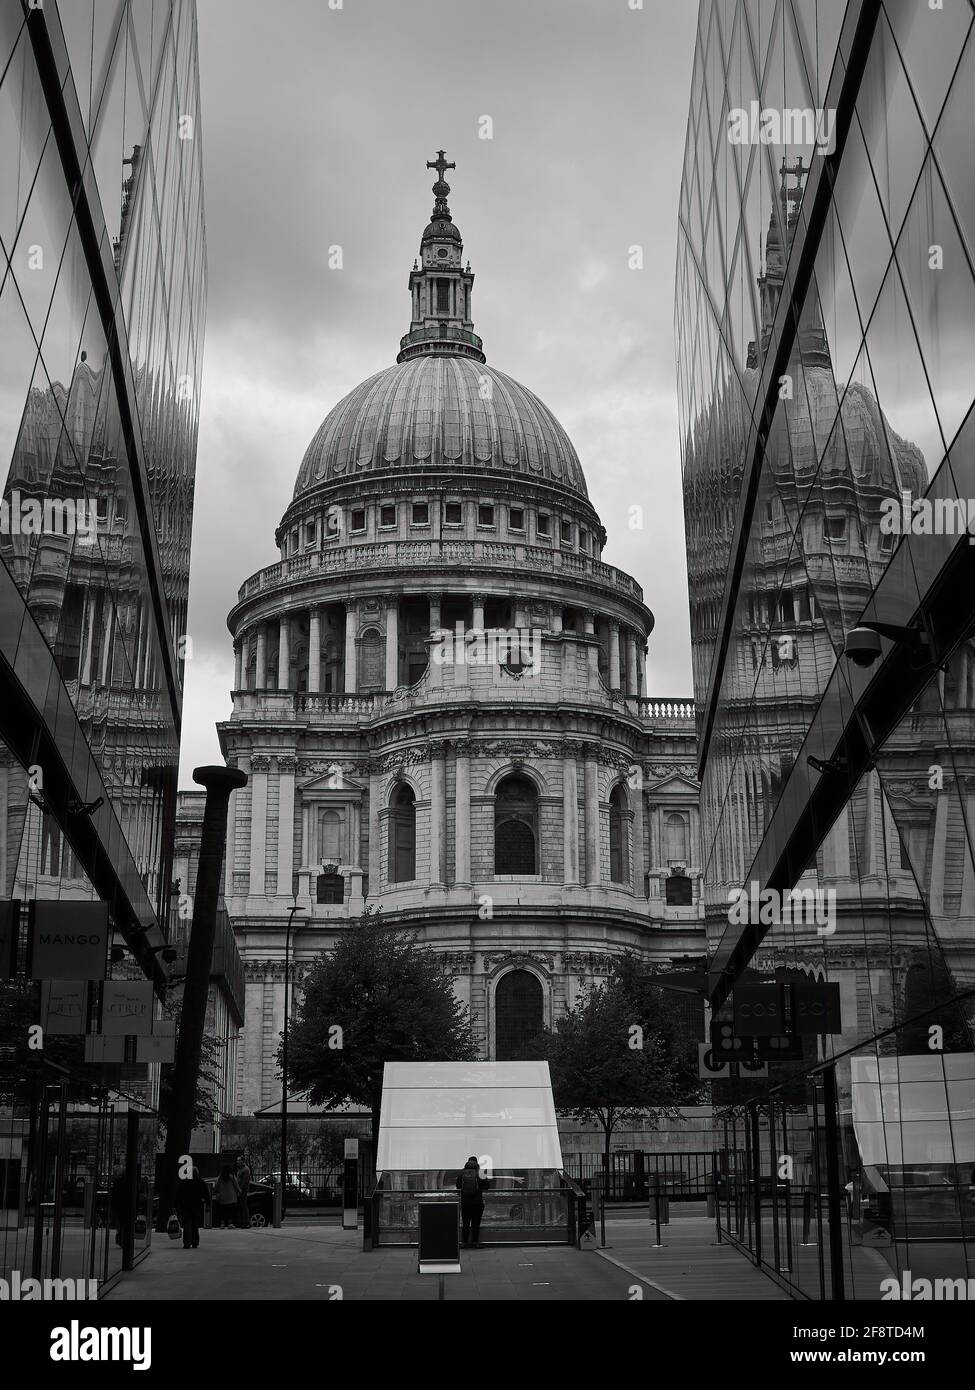 St. Paul’s Cathedral reflected to triplicate by the glass sides of nearby buildings. A silhouetted person in the foreground gives a sense of scale. Stock Photo